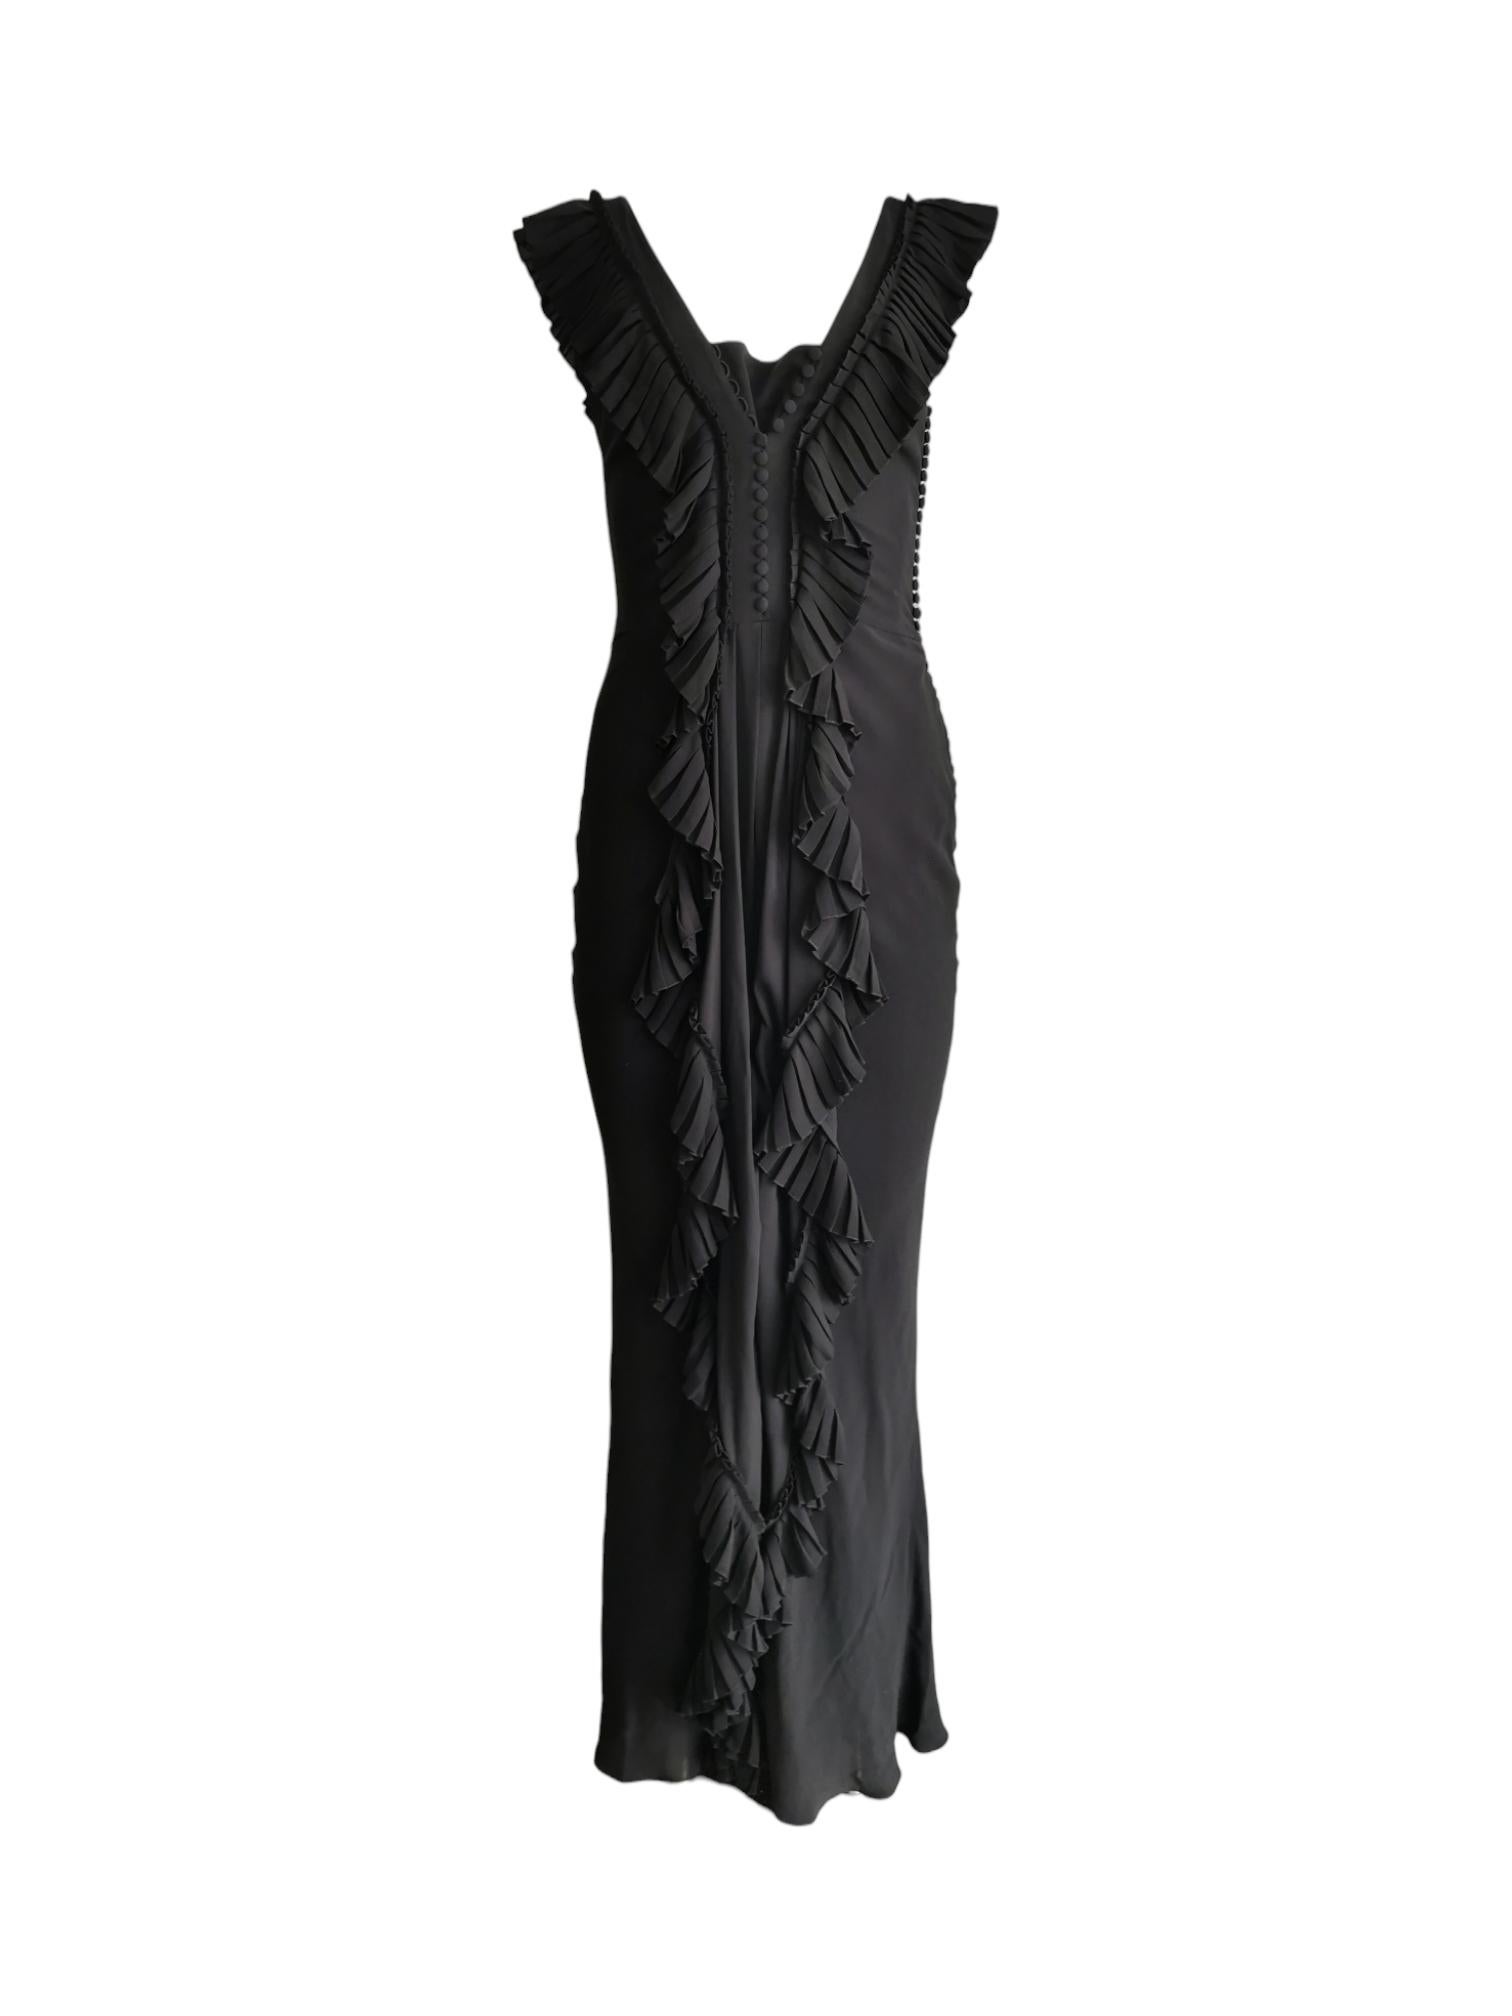 Dior silk ruffle gown, FW 2005 In Excellent Condition For Sale In London, GB